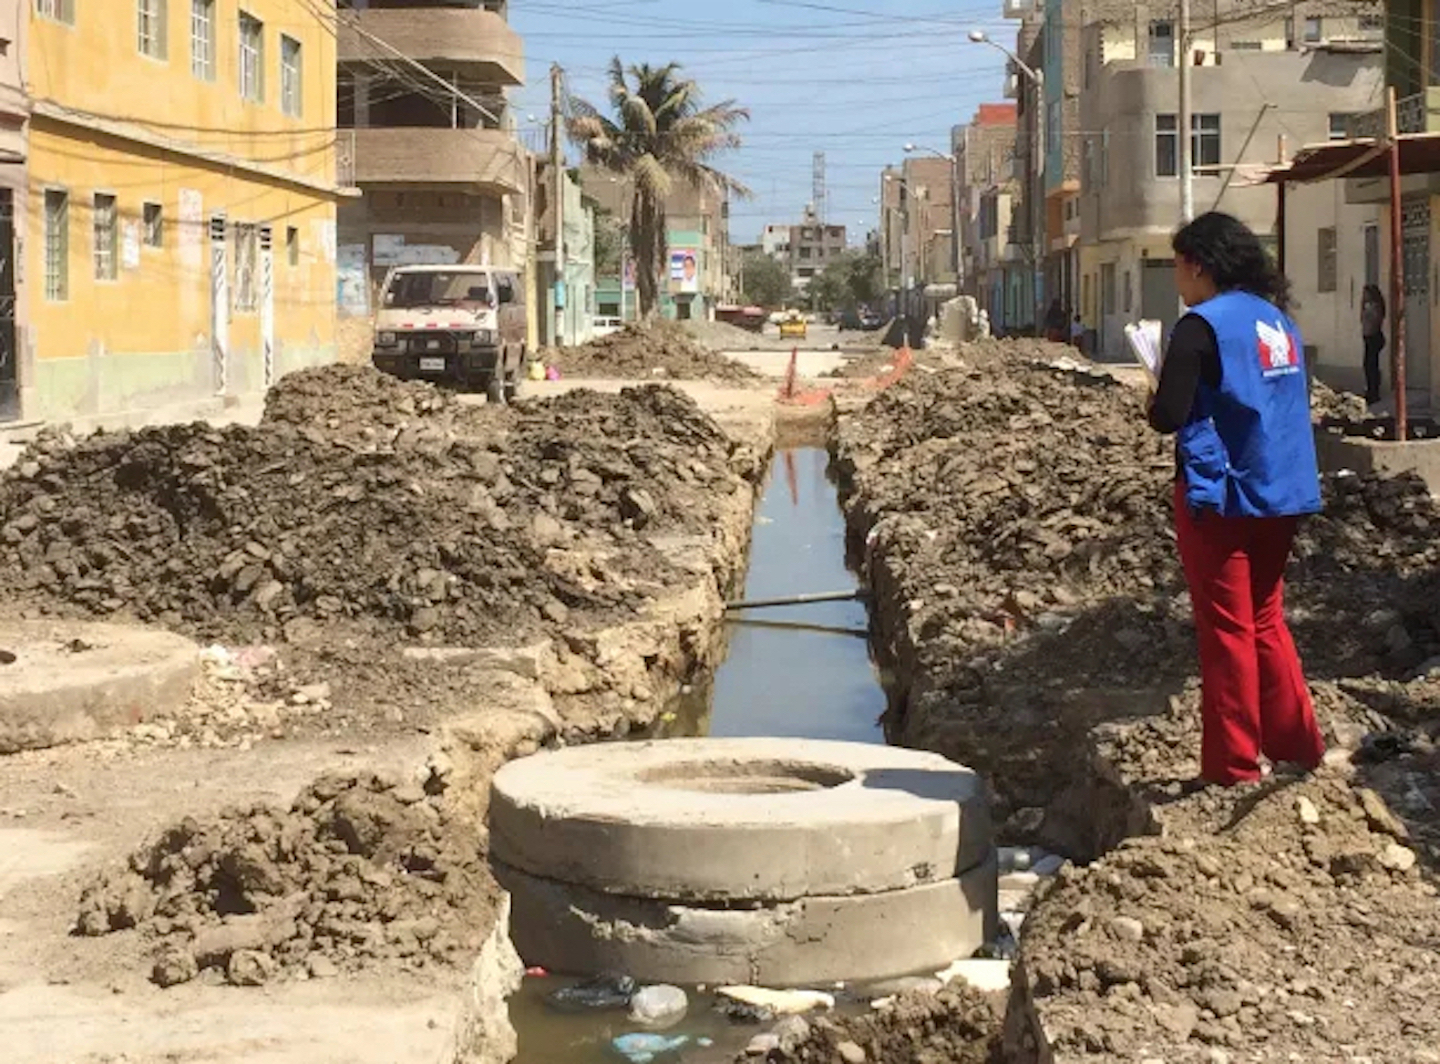 A road in Peru with an open sewerage project going through it